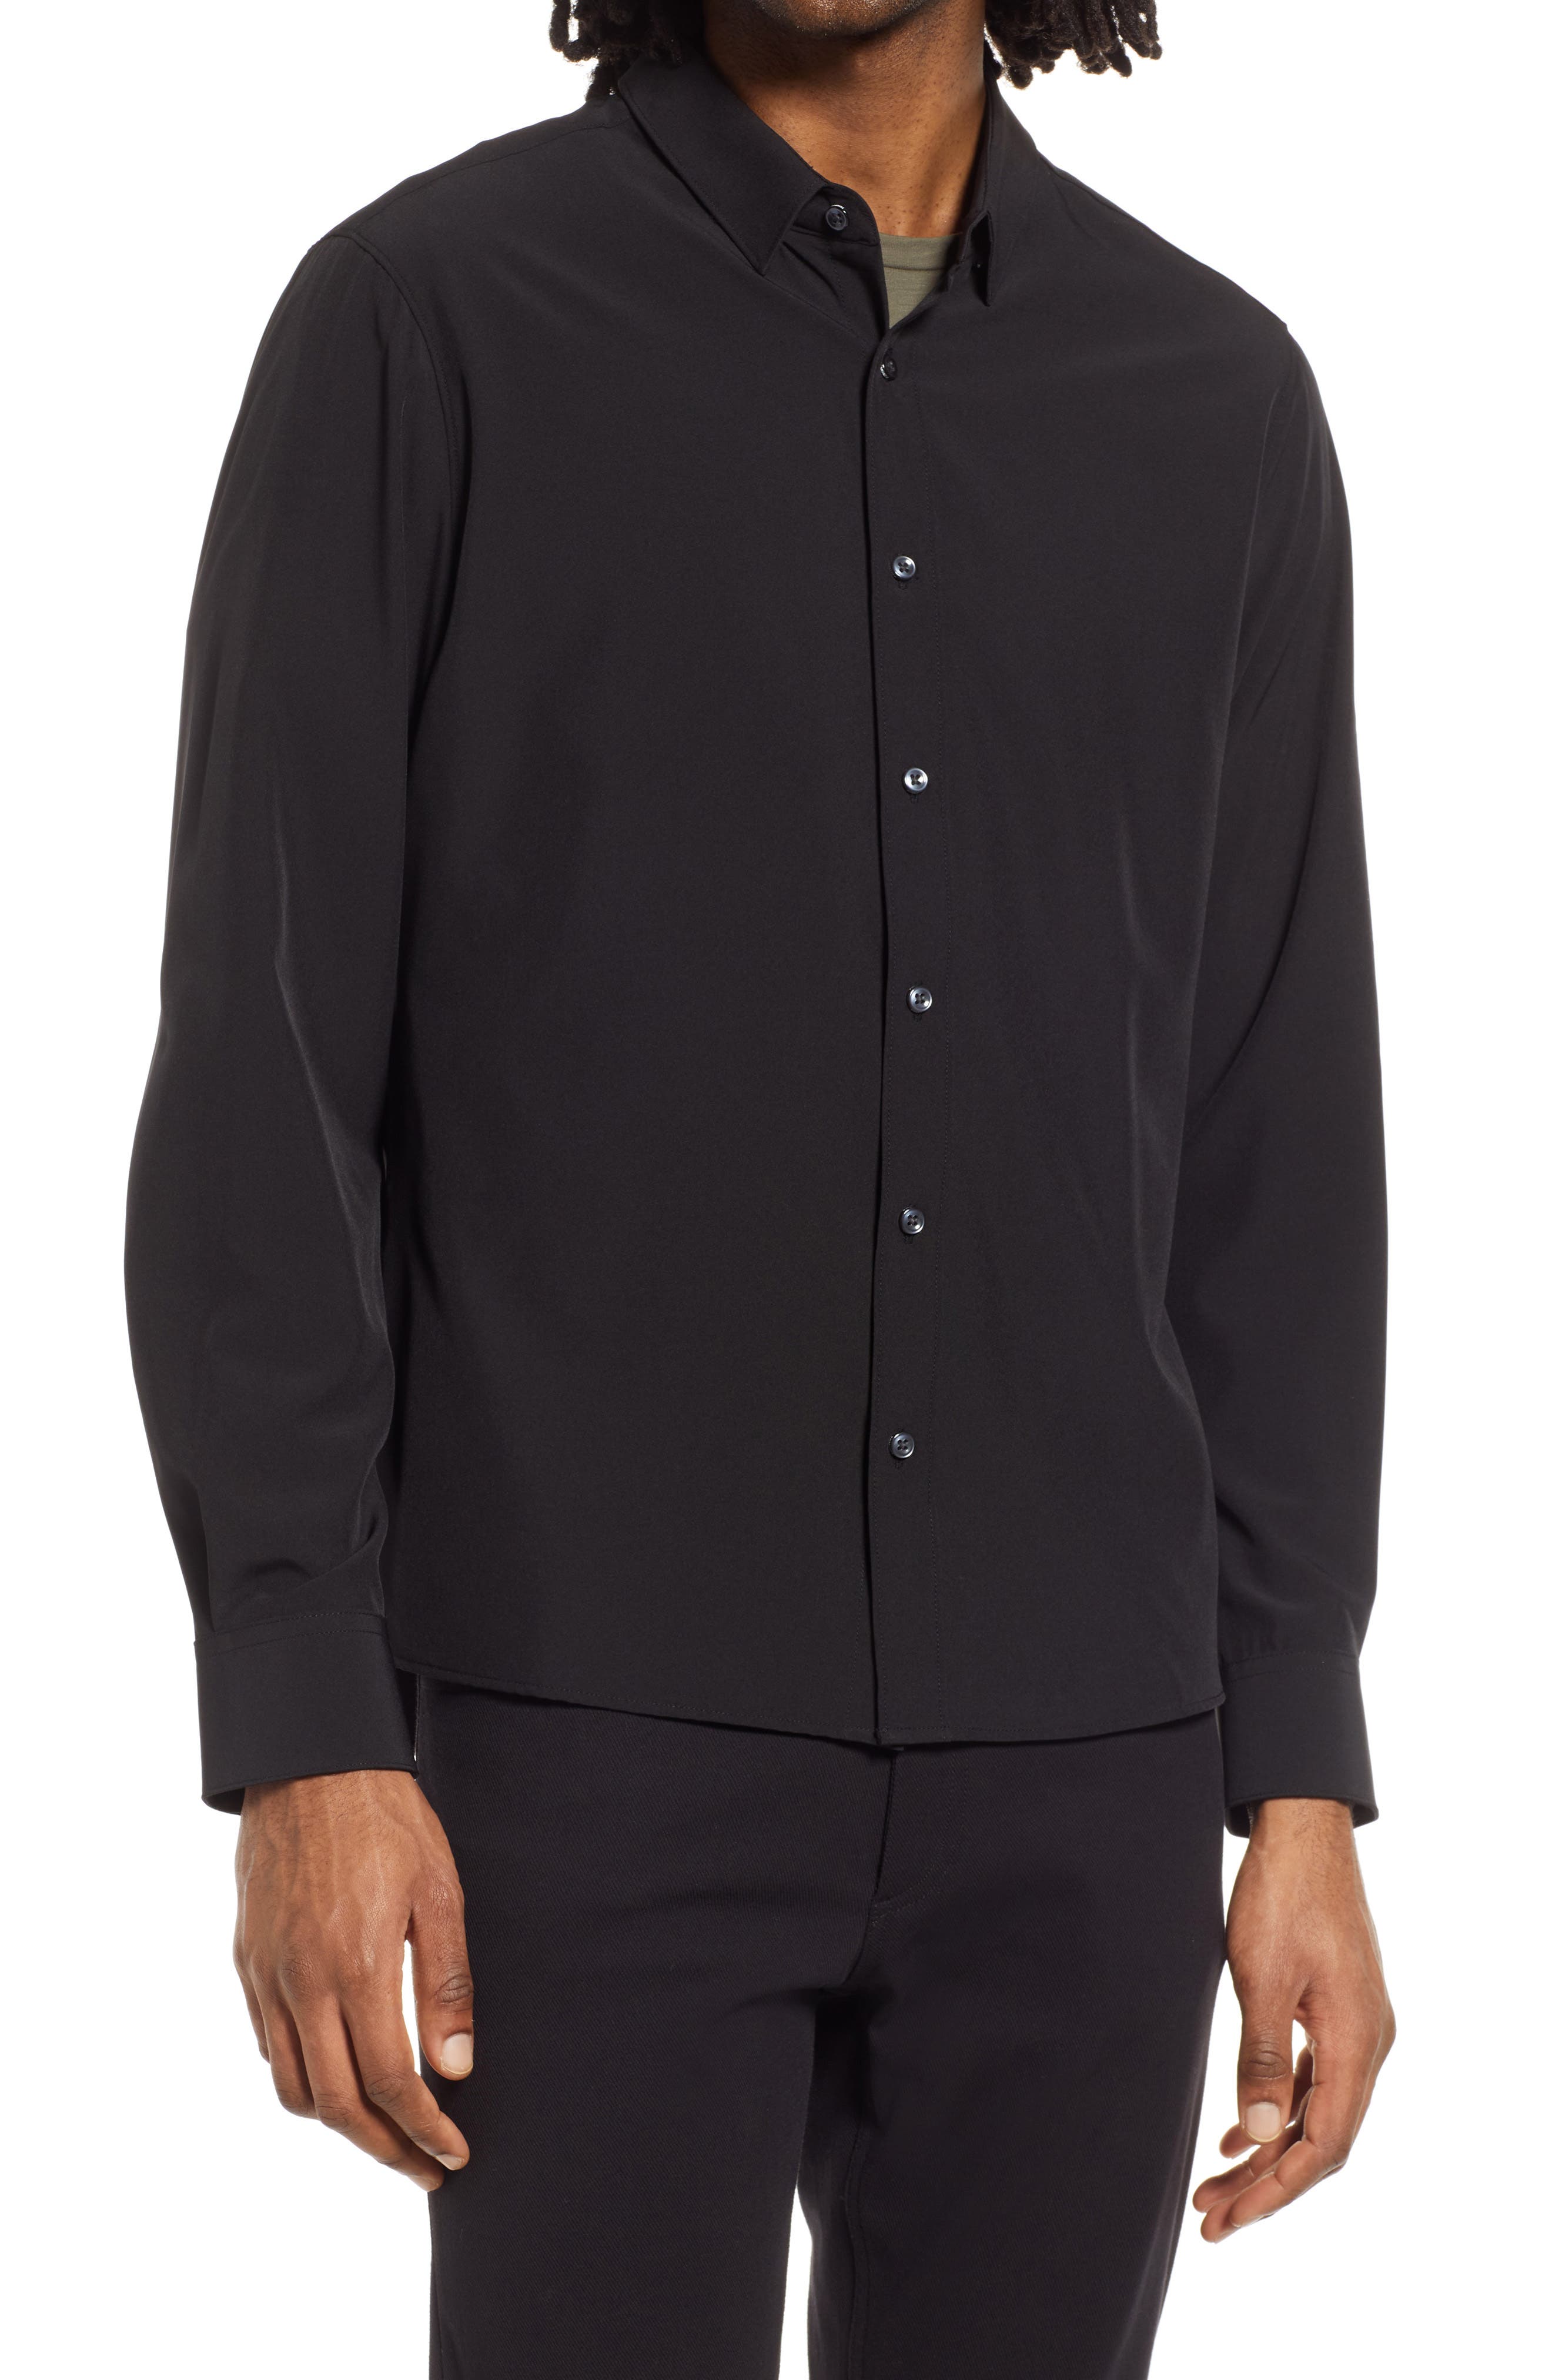 Officina 36 Linen Shirt in Black for Men Mens Clothing Shirts Casual shirts and button-up shirts 